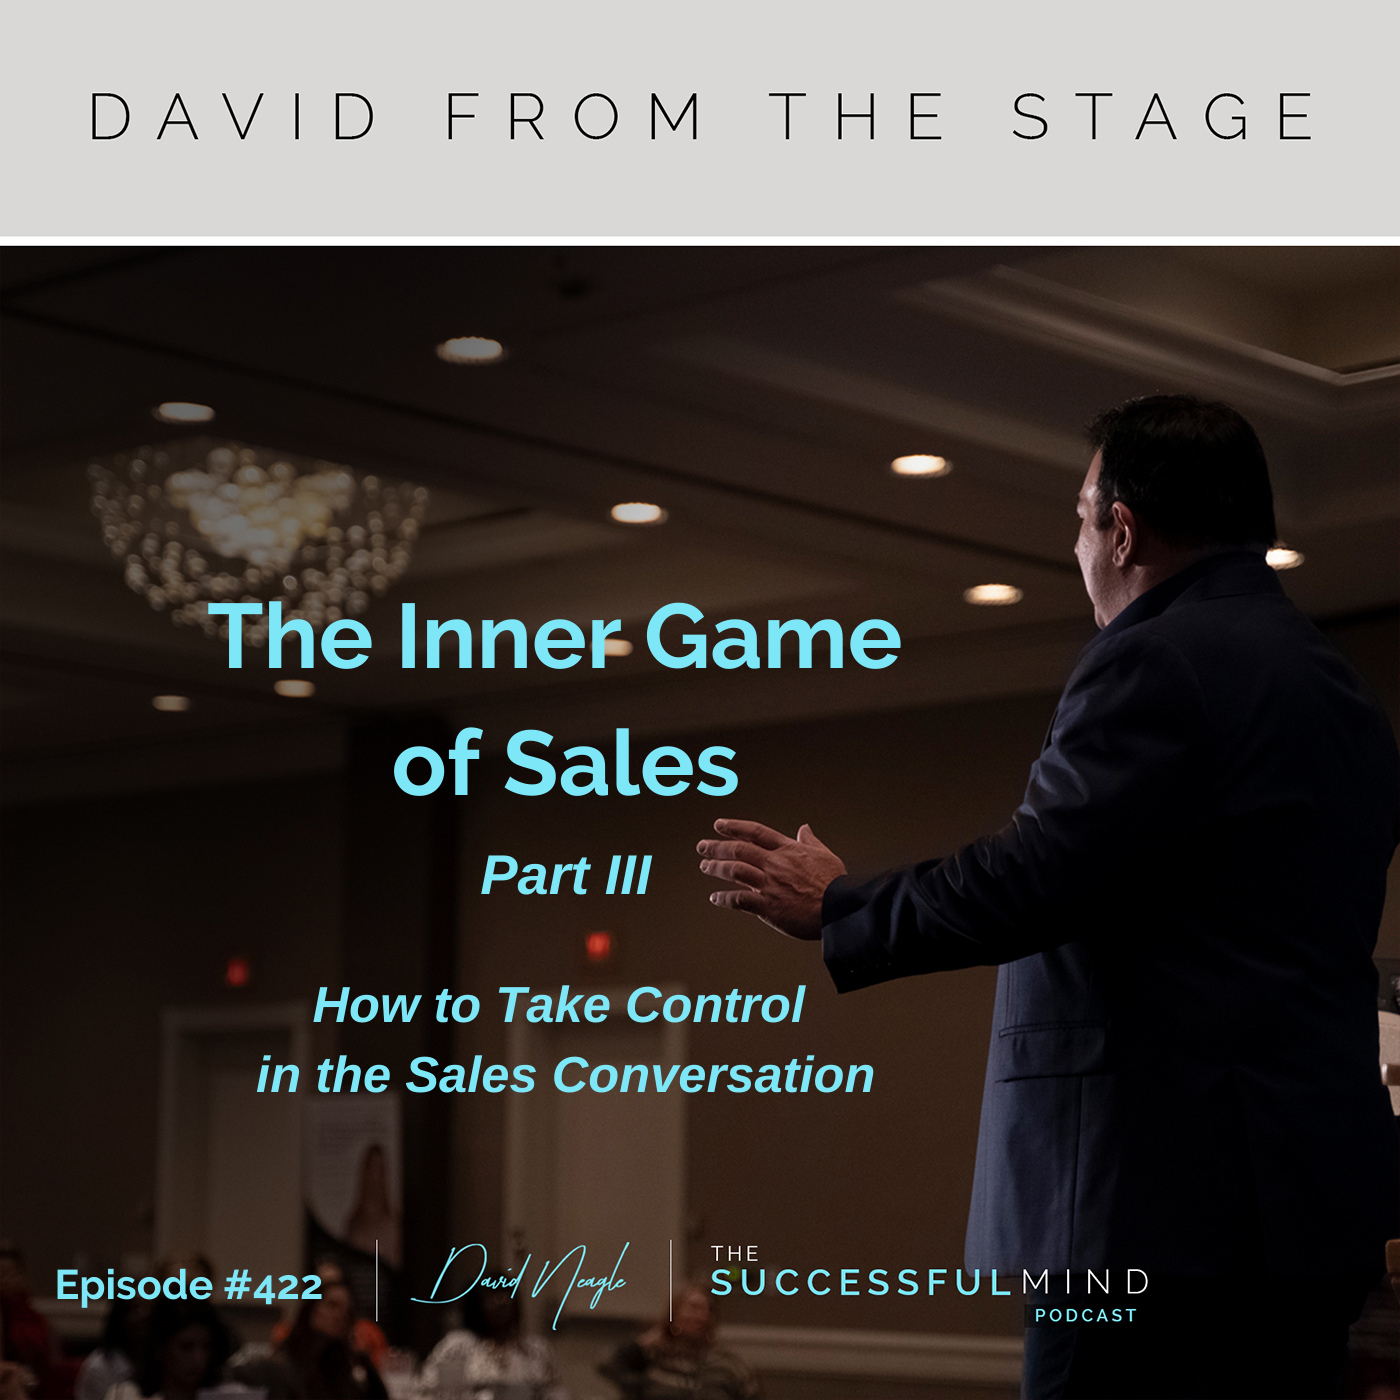 The Successful Mind Podcast - Episode 422 - The Inner Game of Sales - Part III